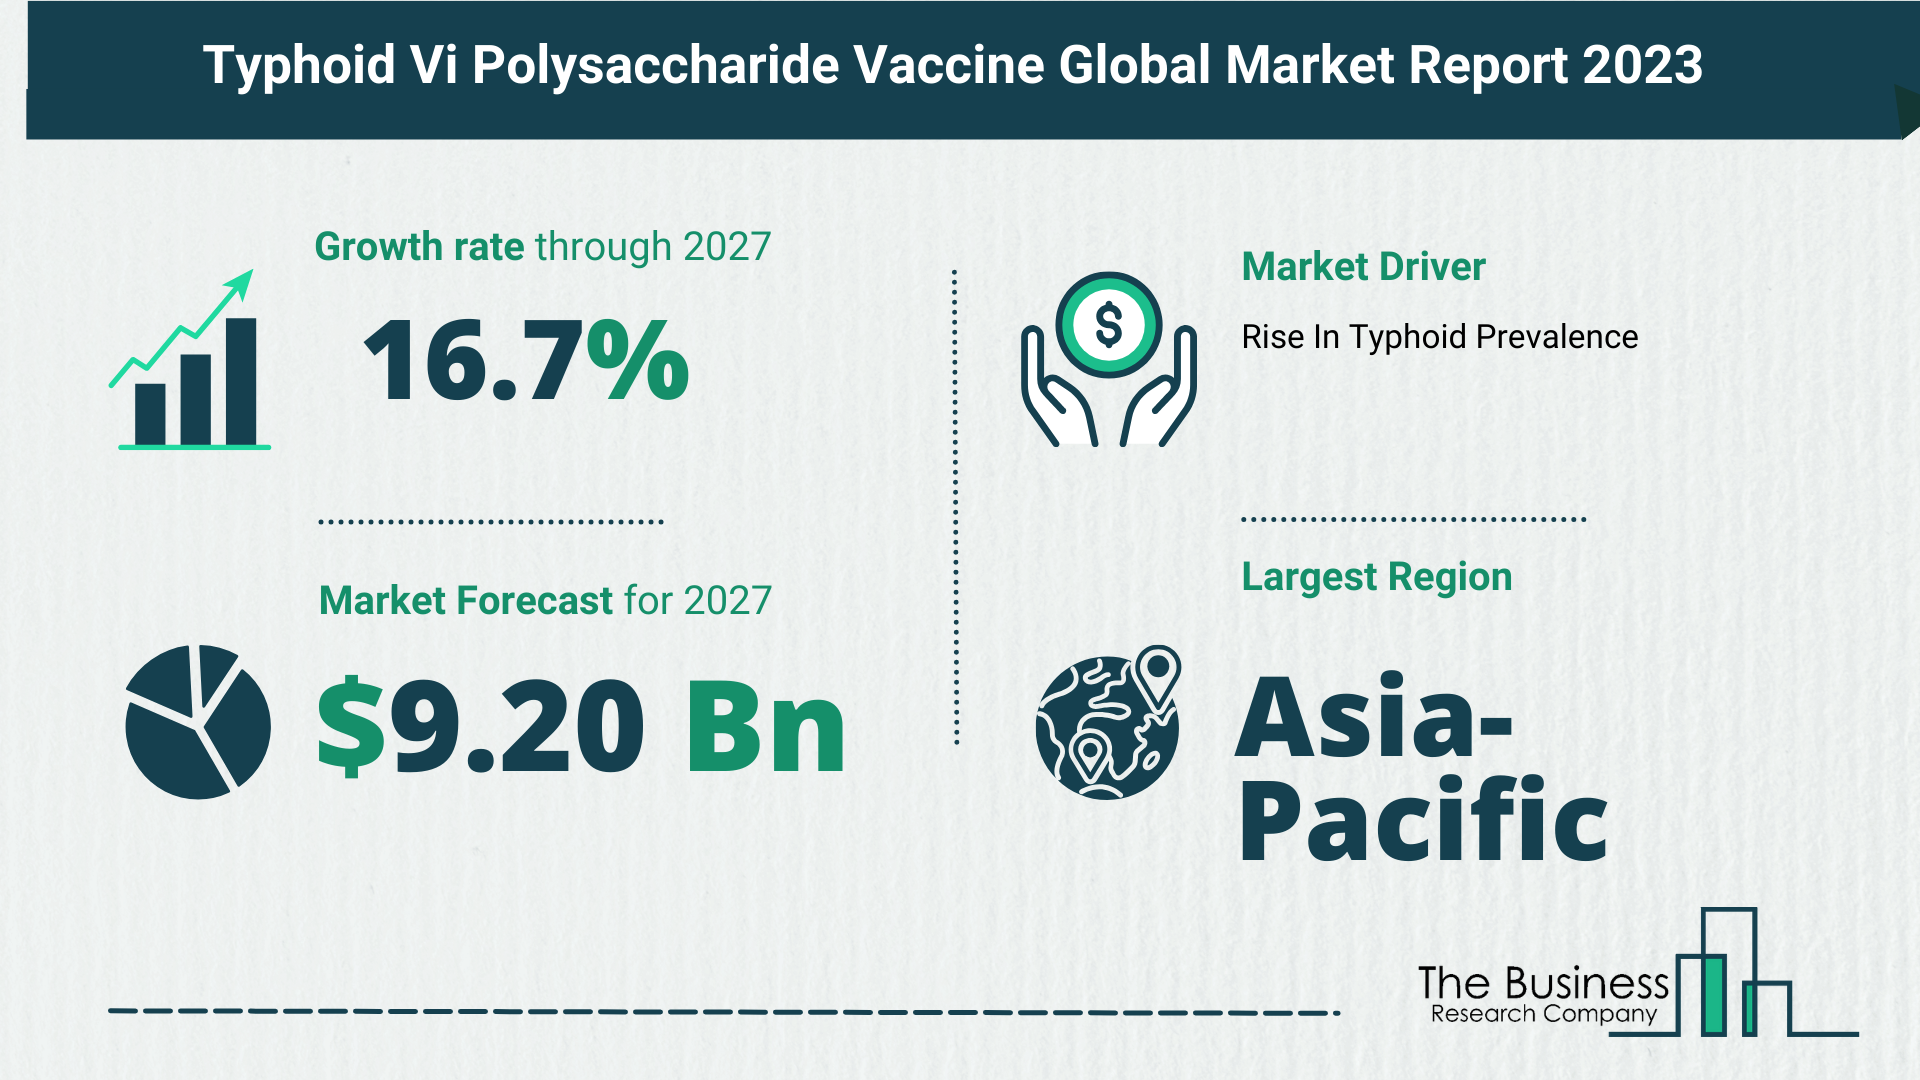 Understand How The Typhoid Vi Polysaccharide Vaccine Market Is Poised To Grow Through 2023-2032